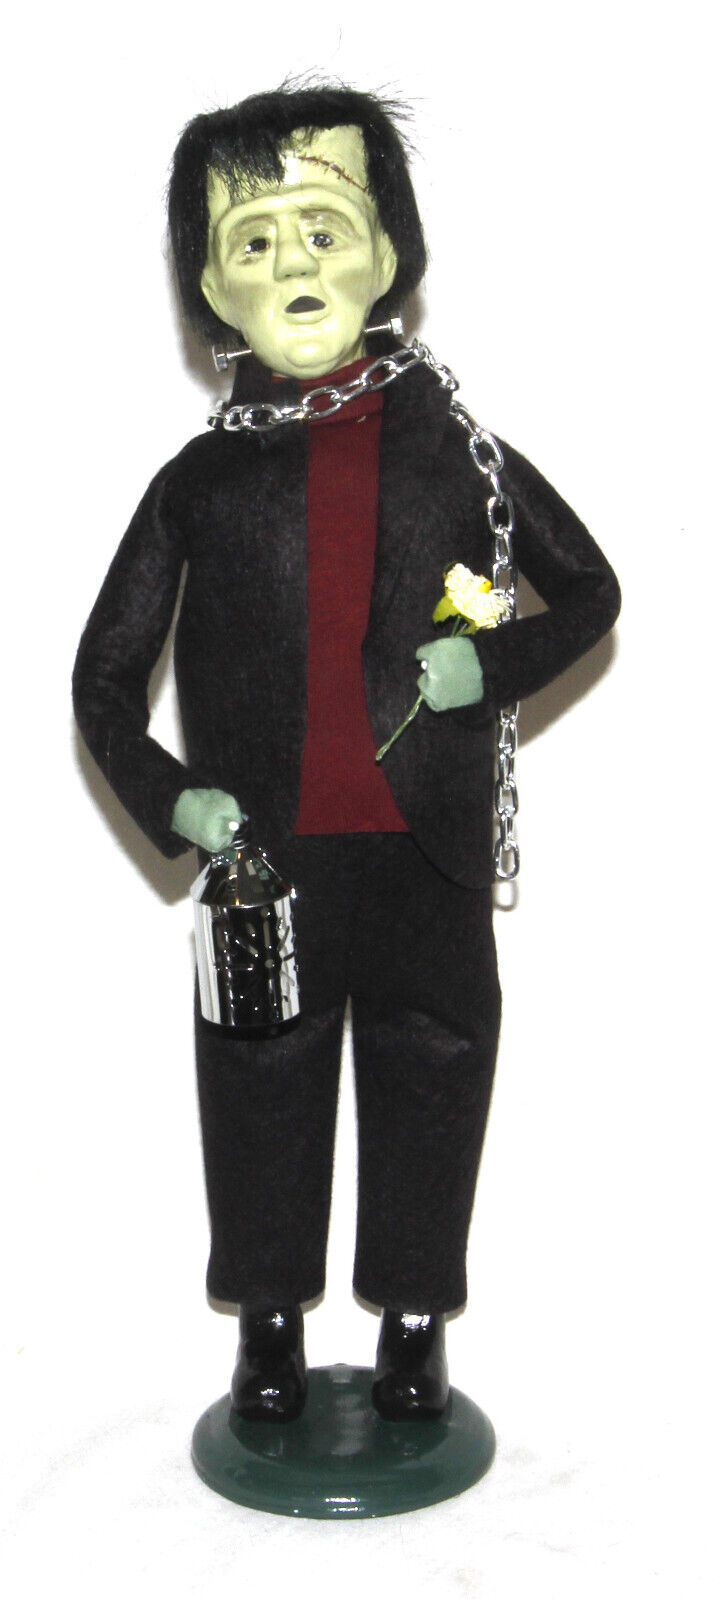 Byers Choice FRANKENSTEIN -  Halloween or Everyday - FREE PRIORITY SHIPPING